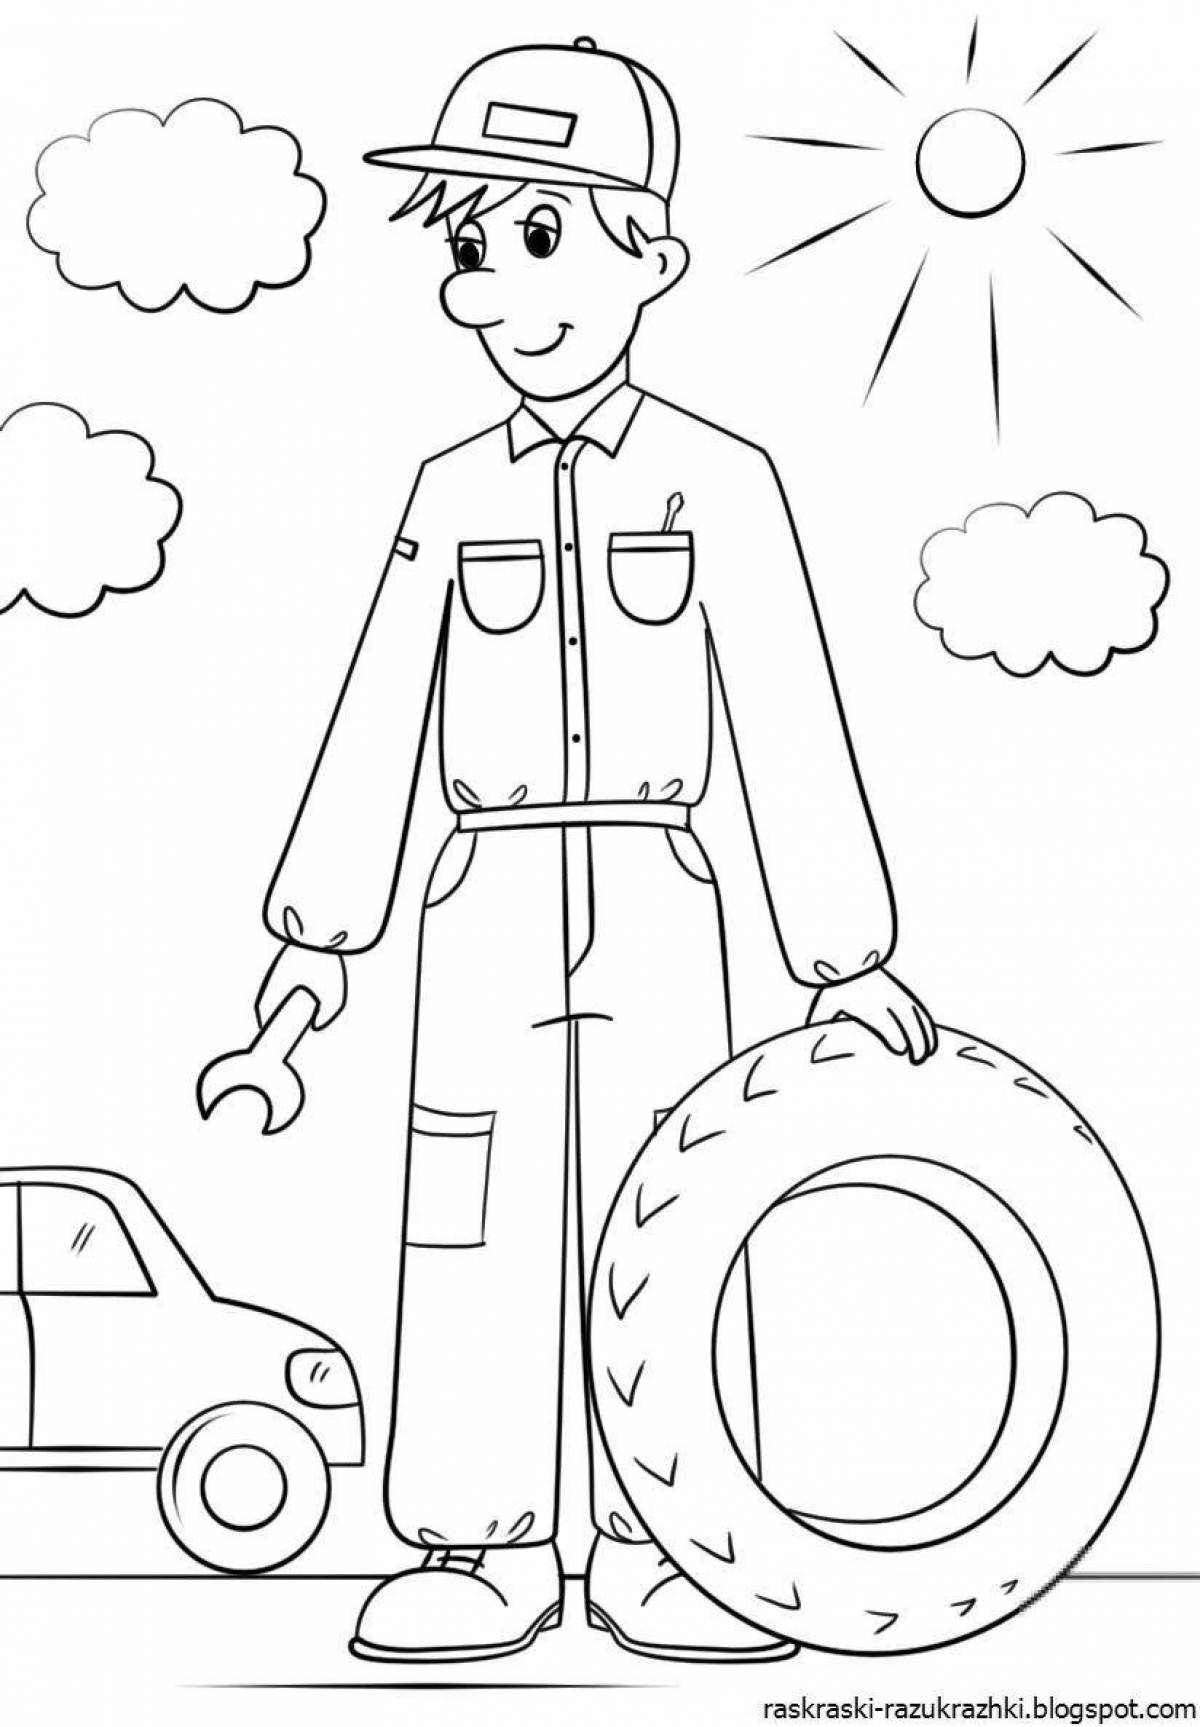 Colorful job coloring pages for kids